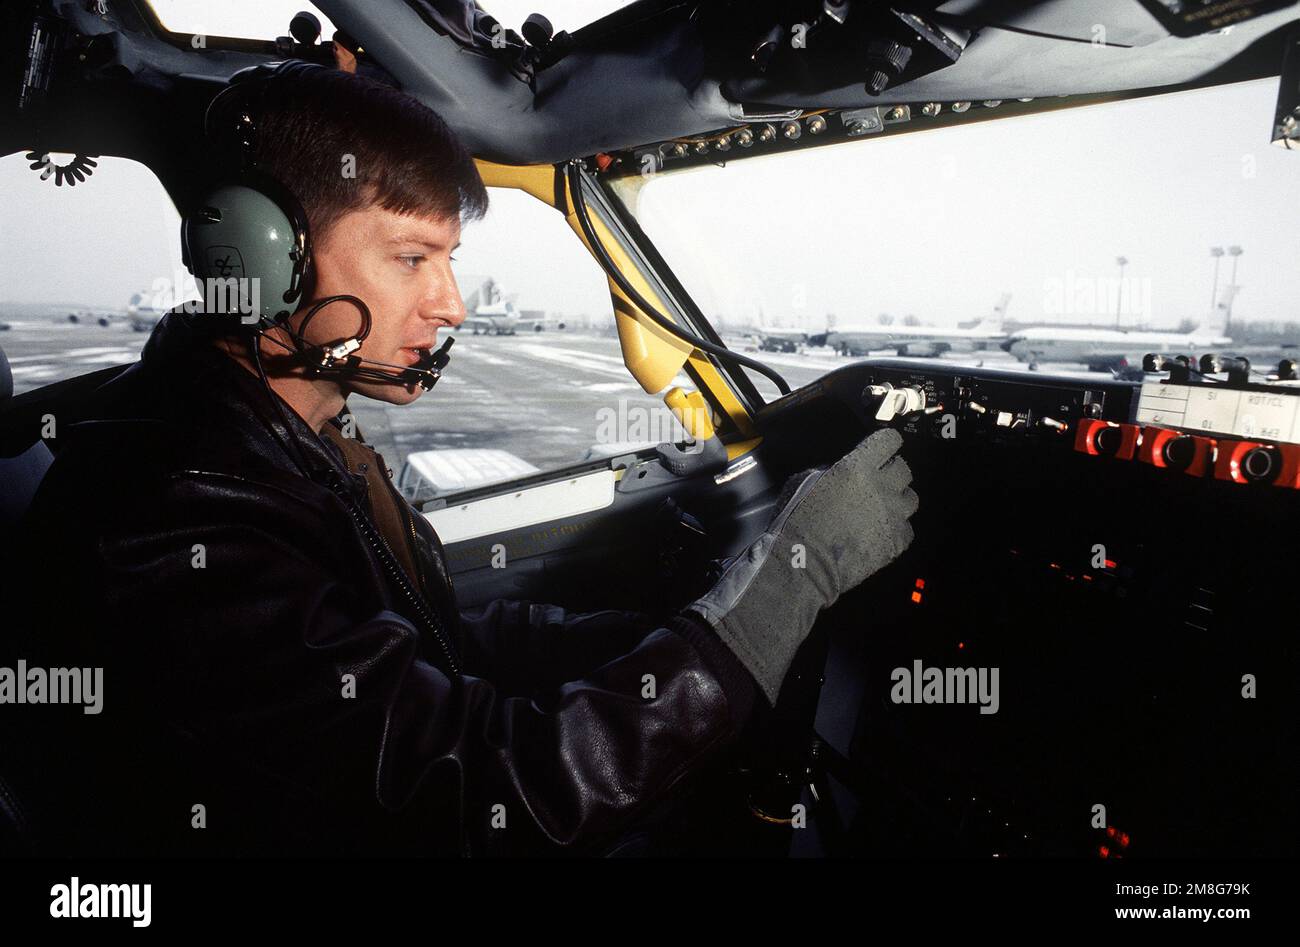 MAJ Mike Swigert, pilot, 38th Strategic Reconnaissance Squadron, 55th Strategic Reconnaissance Wing, Offutt AFB, preflights the cockpit of an RC-135 Stratolifter aircraft. Base: Offutt Air Force Base State: Nebraska (NE) Country: United States Of America (USA) Stock Photo